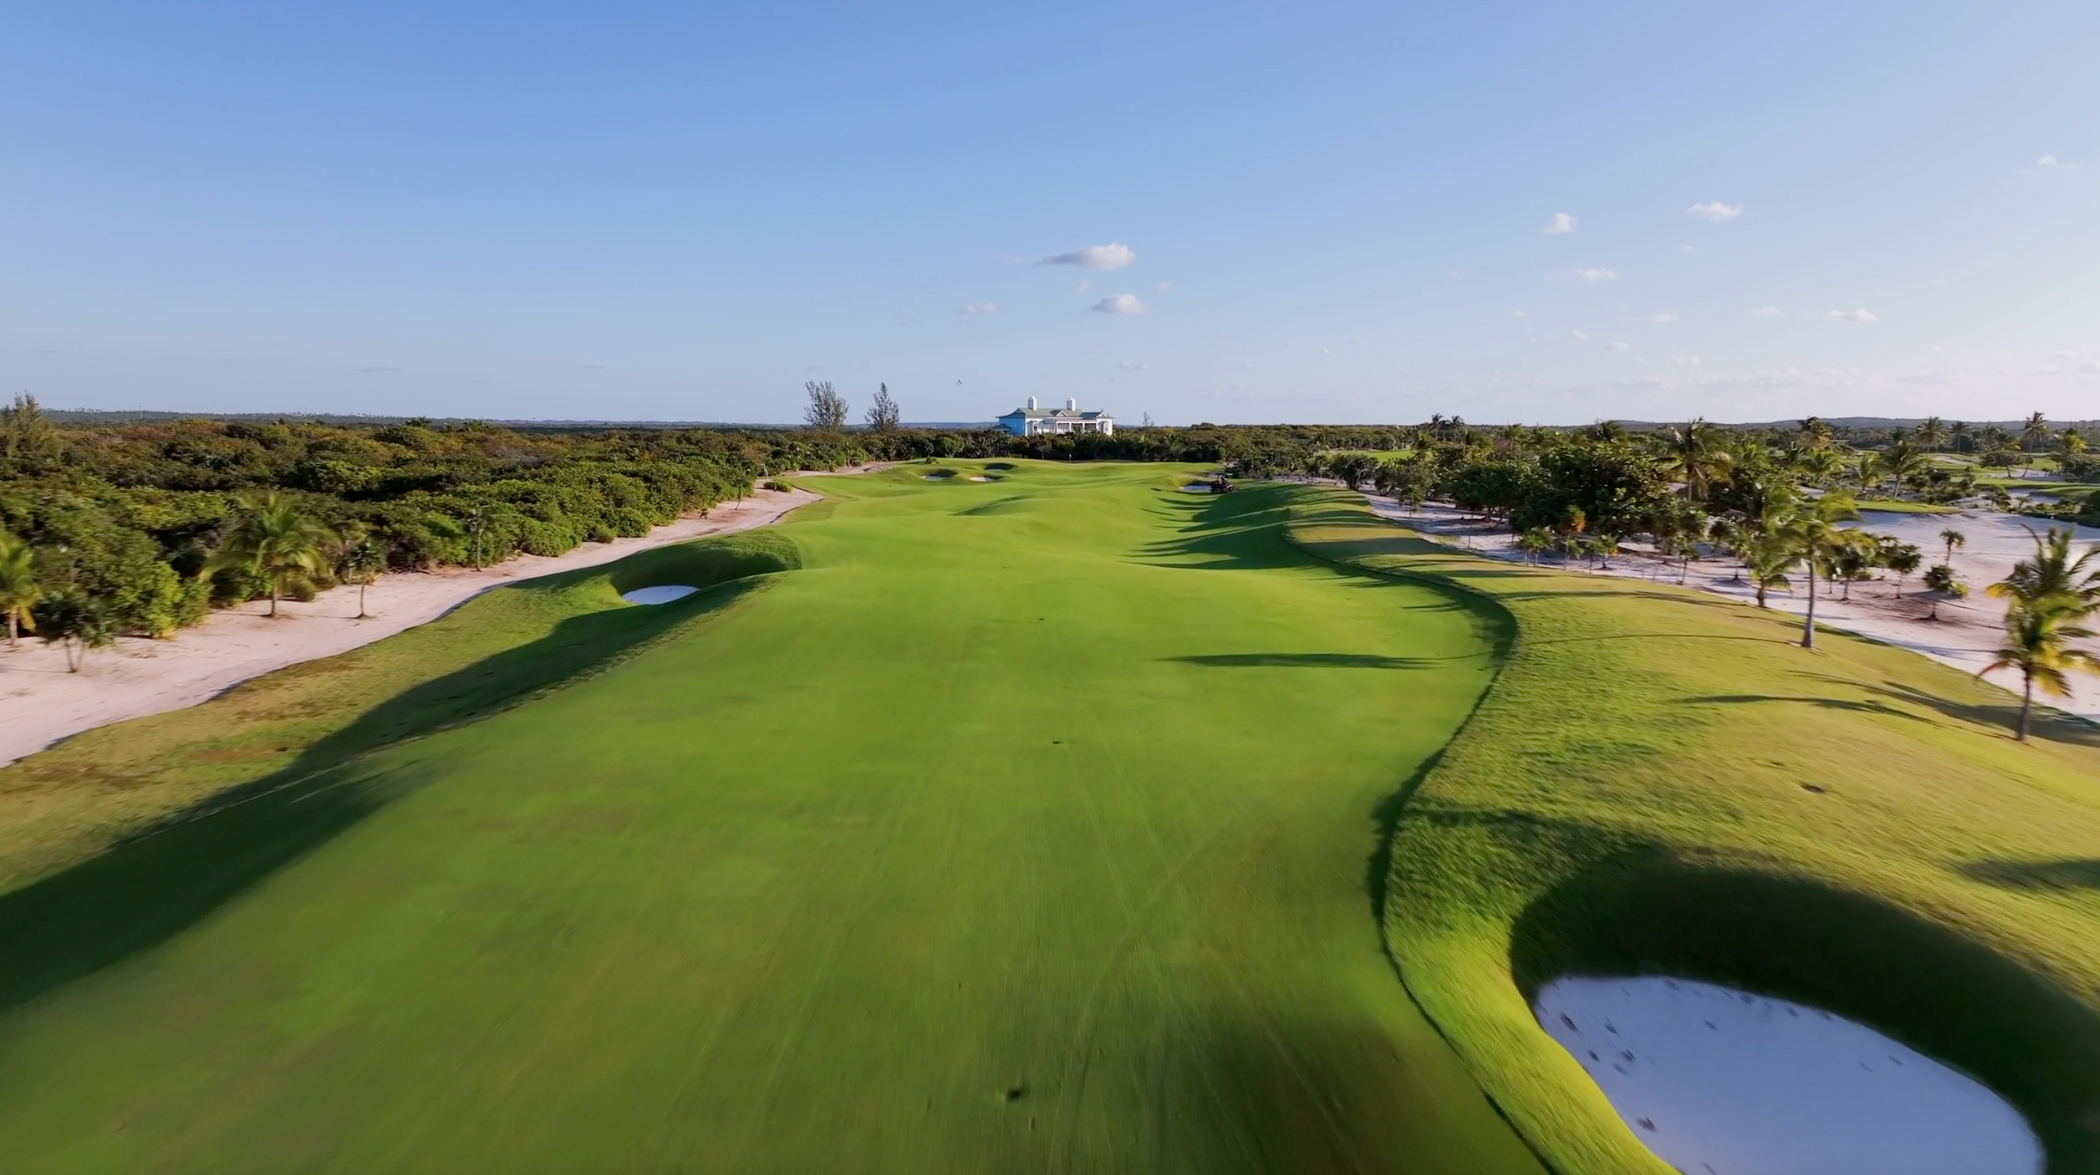 Aerial view of The Abaco Club's lush golf course adjacent to the serene Bahamian coastline, showcasing the luxury of island golfing